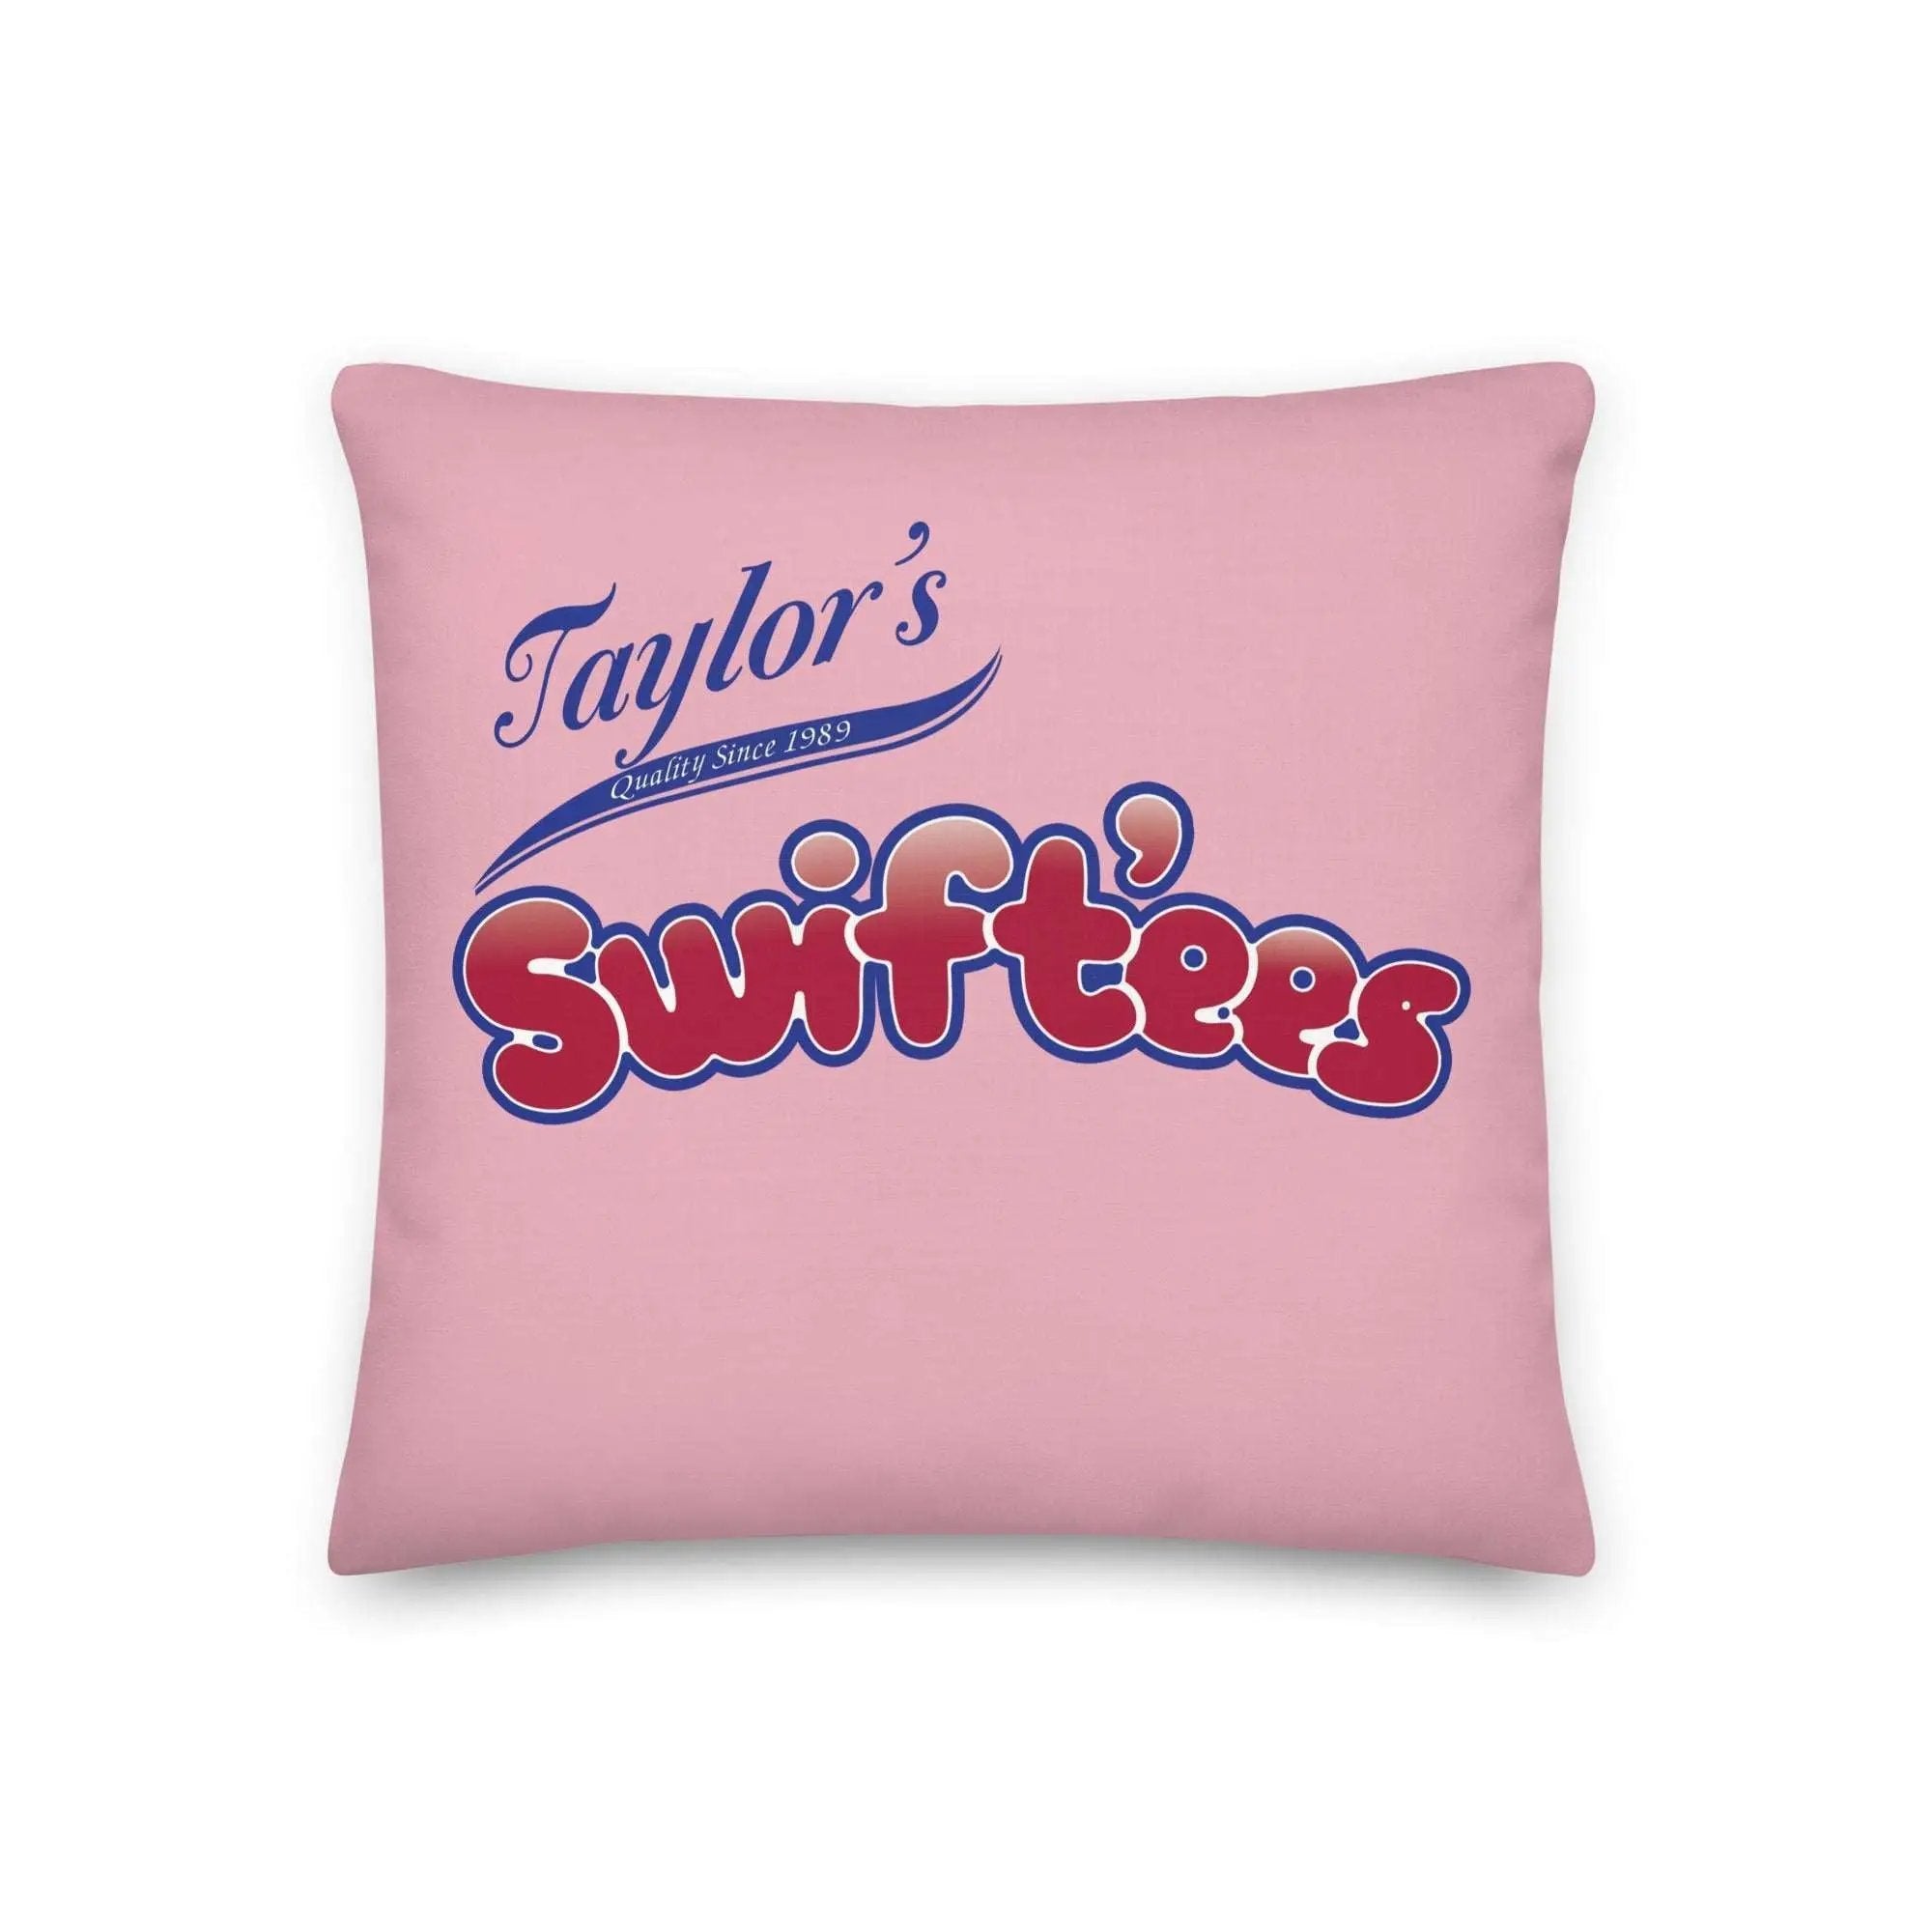 a pink pillow with taylor's swifties on it